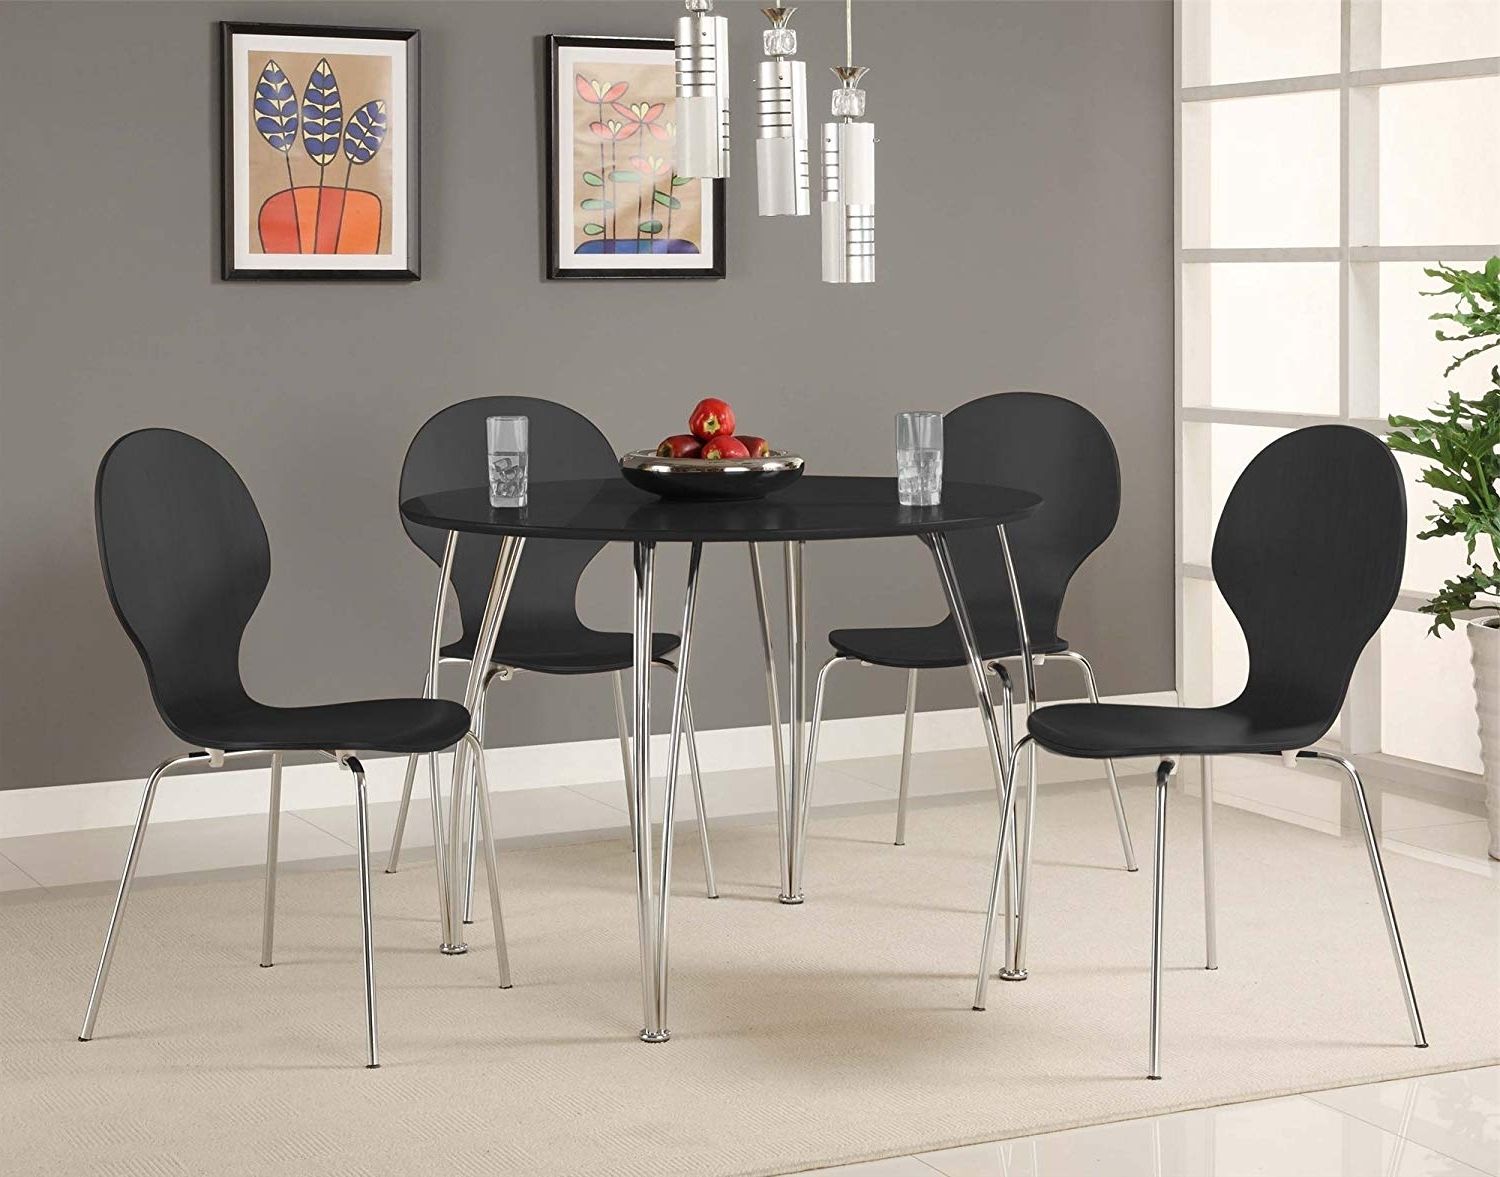 Most Up To Date Acrylic Round Dining Tables Regarding Amazon: Dhp Bentwood Round Dining Table Top, Contemporary Design (View 23 of 25)